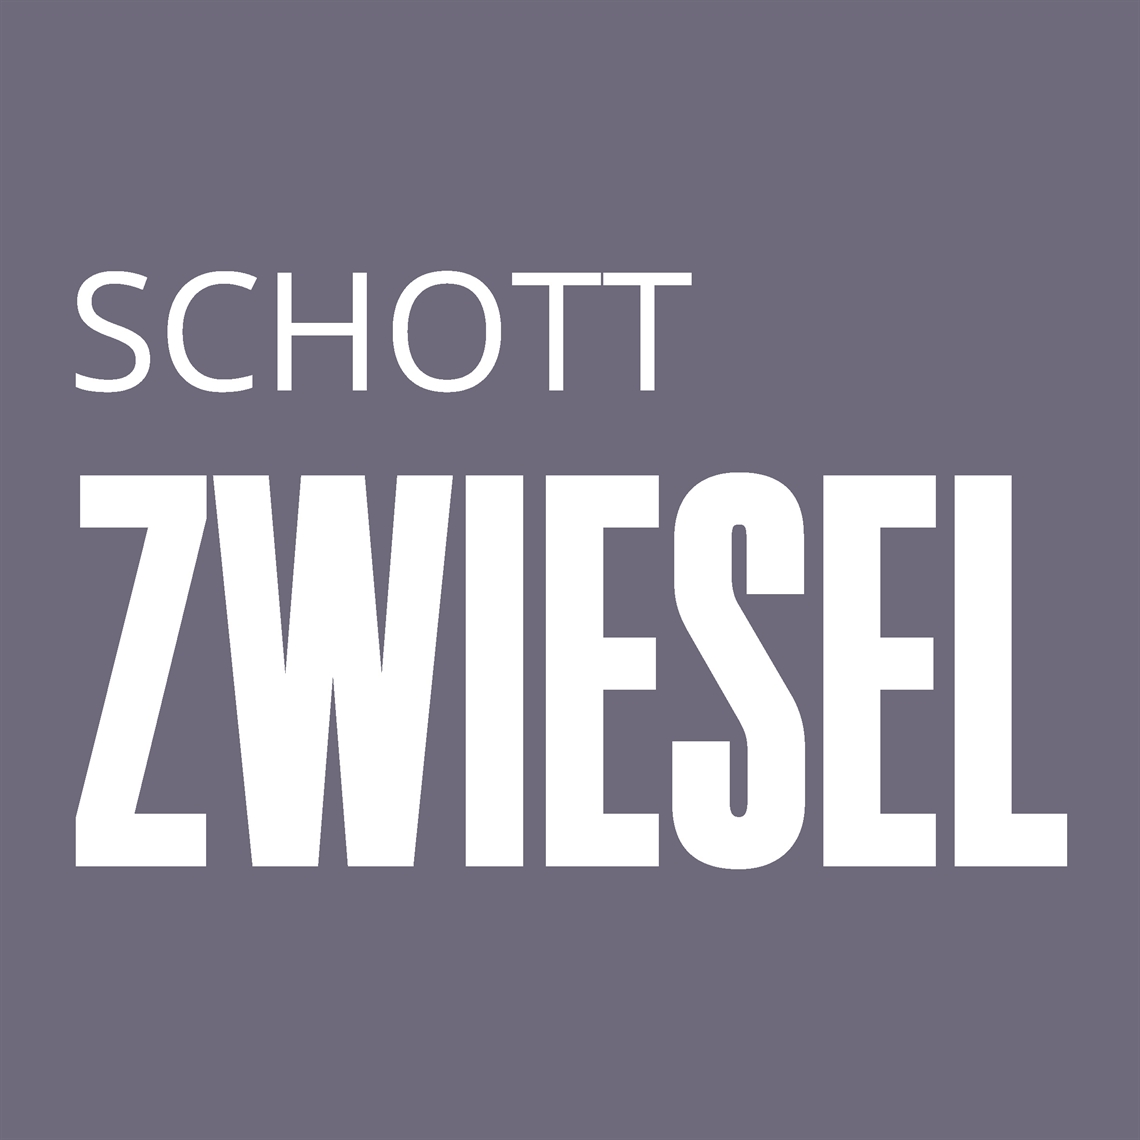 View our collection of Schott Zwiesel Wine Tasting Glasses